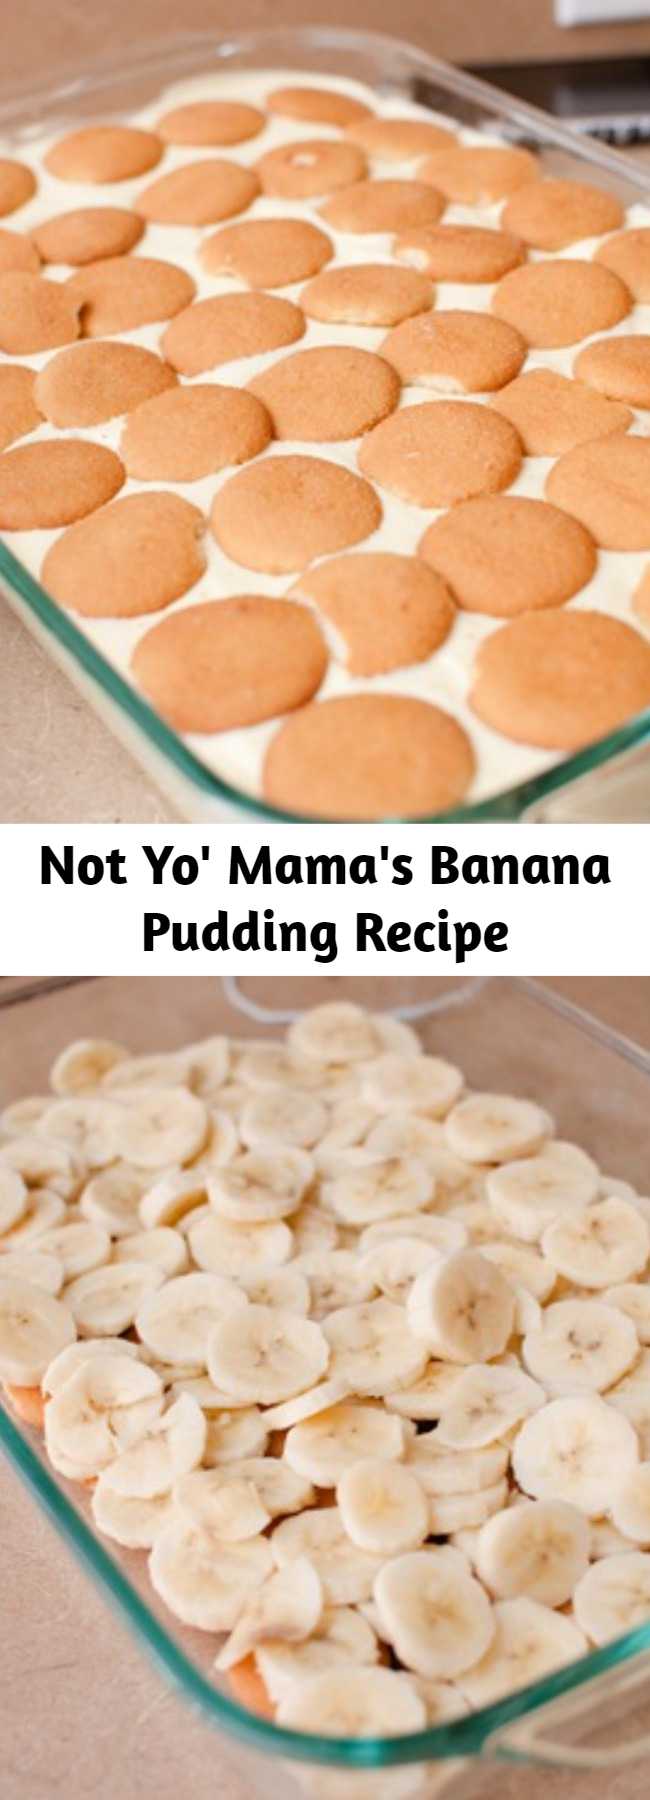 Not Yo' Mama's Banana Pudding Recipe - I found this recipe about 5 years ago and I’ve been makin’ it ever since.  This is the ONLY way I can eat it now!!!  Spoiled!!!  If you haven’t tried this version yet, you MUST!!!!  This is definitely the BEST!!!  Not at all like momma used to make it!!! 